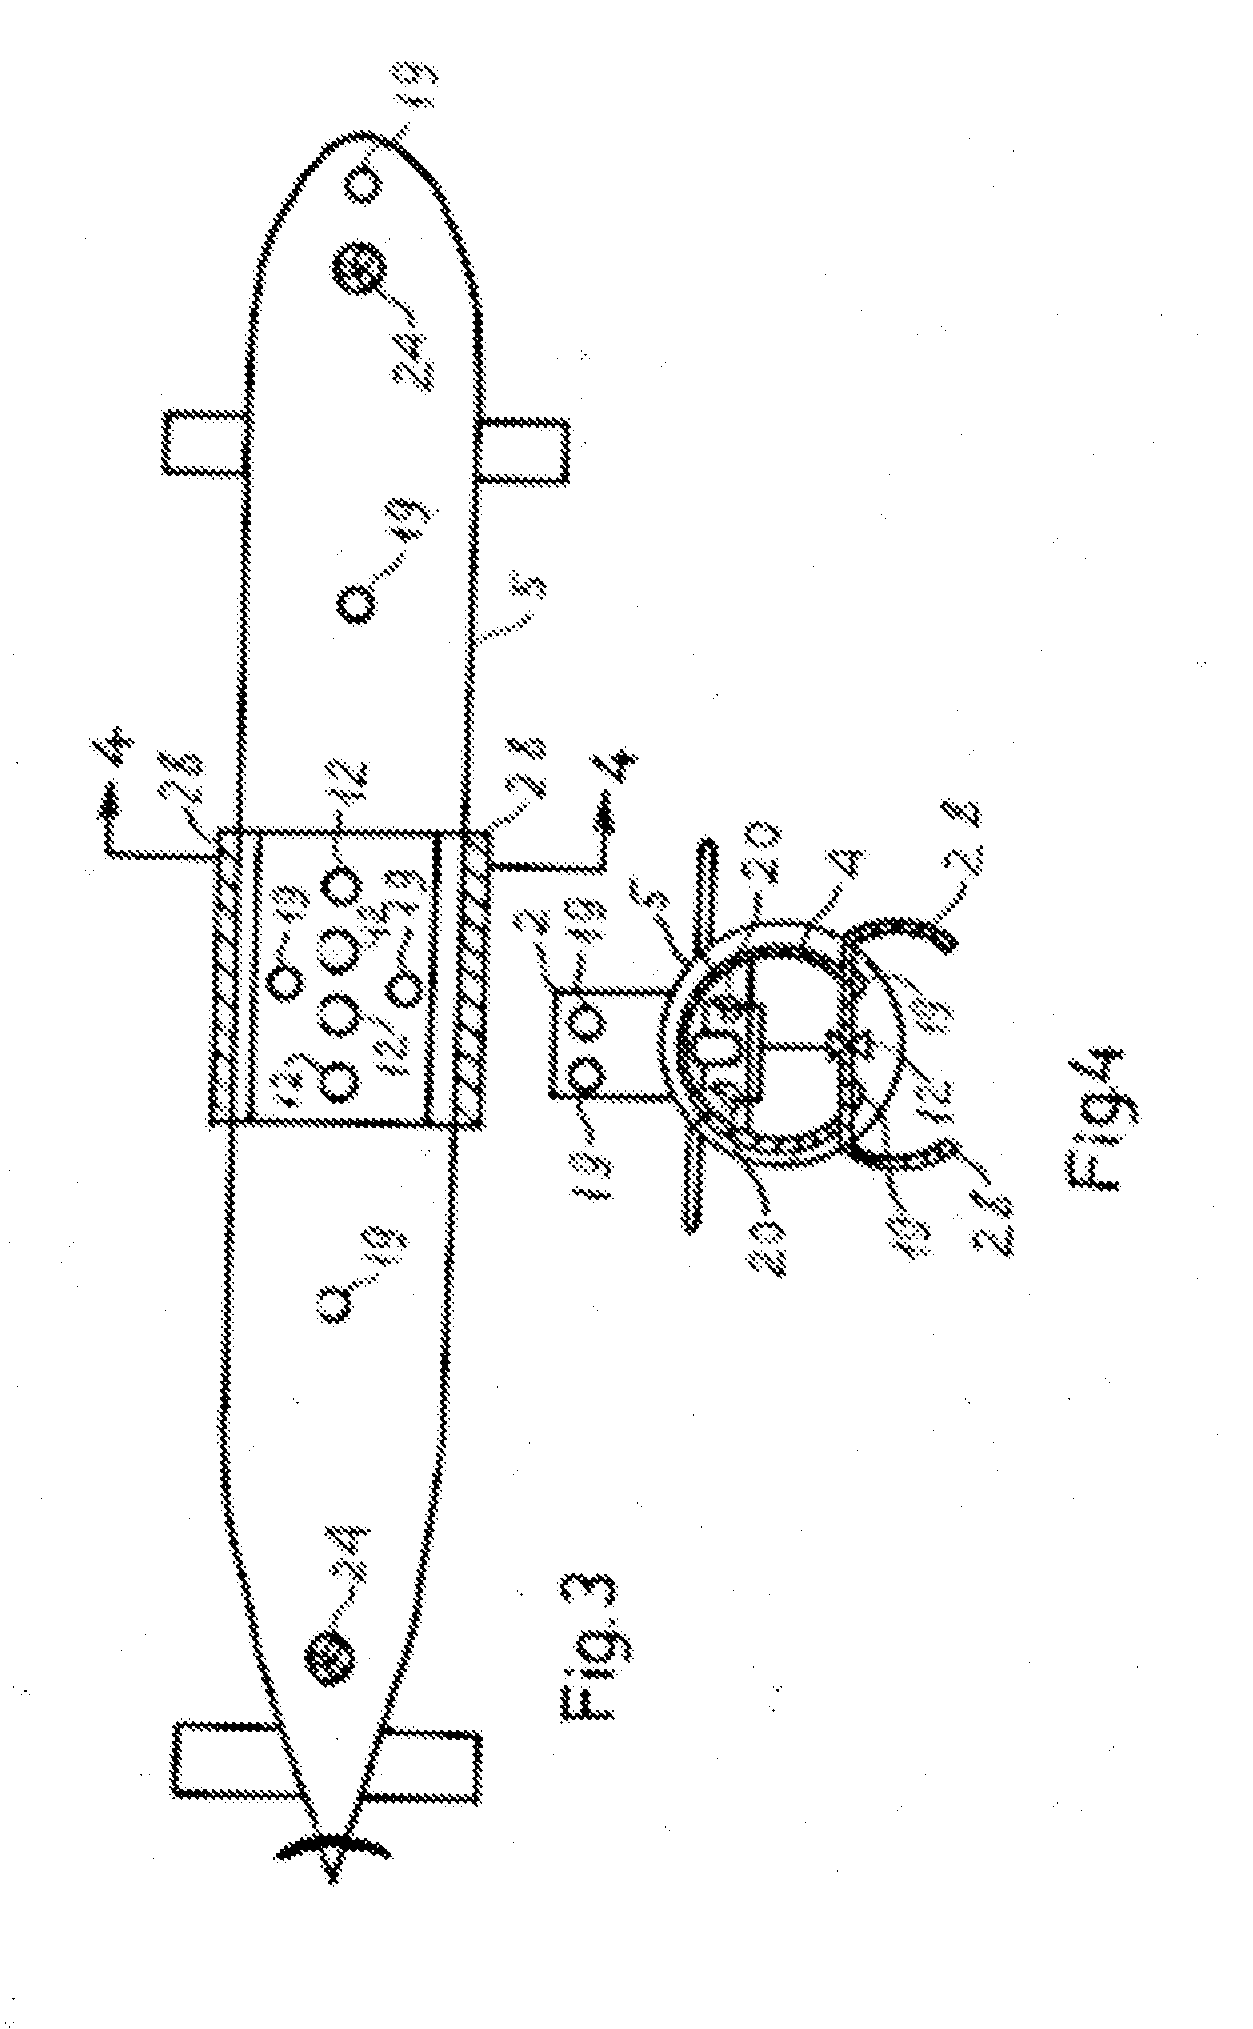 Oil spill response submarine and method of use thereof